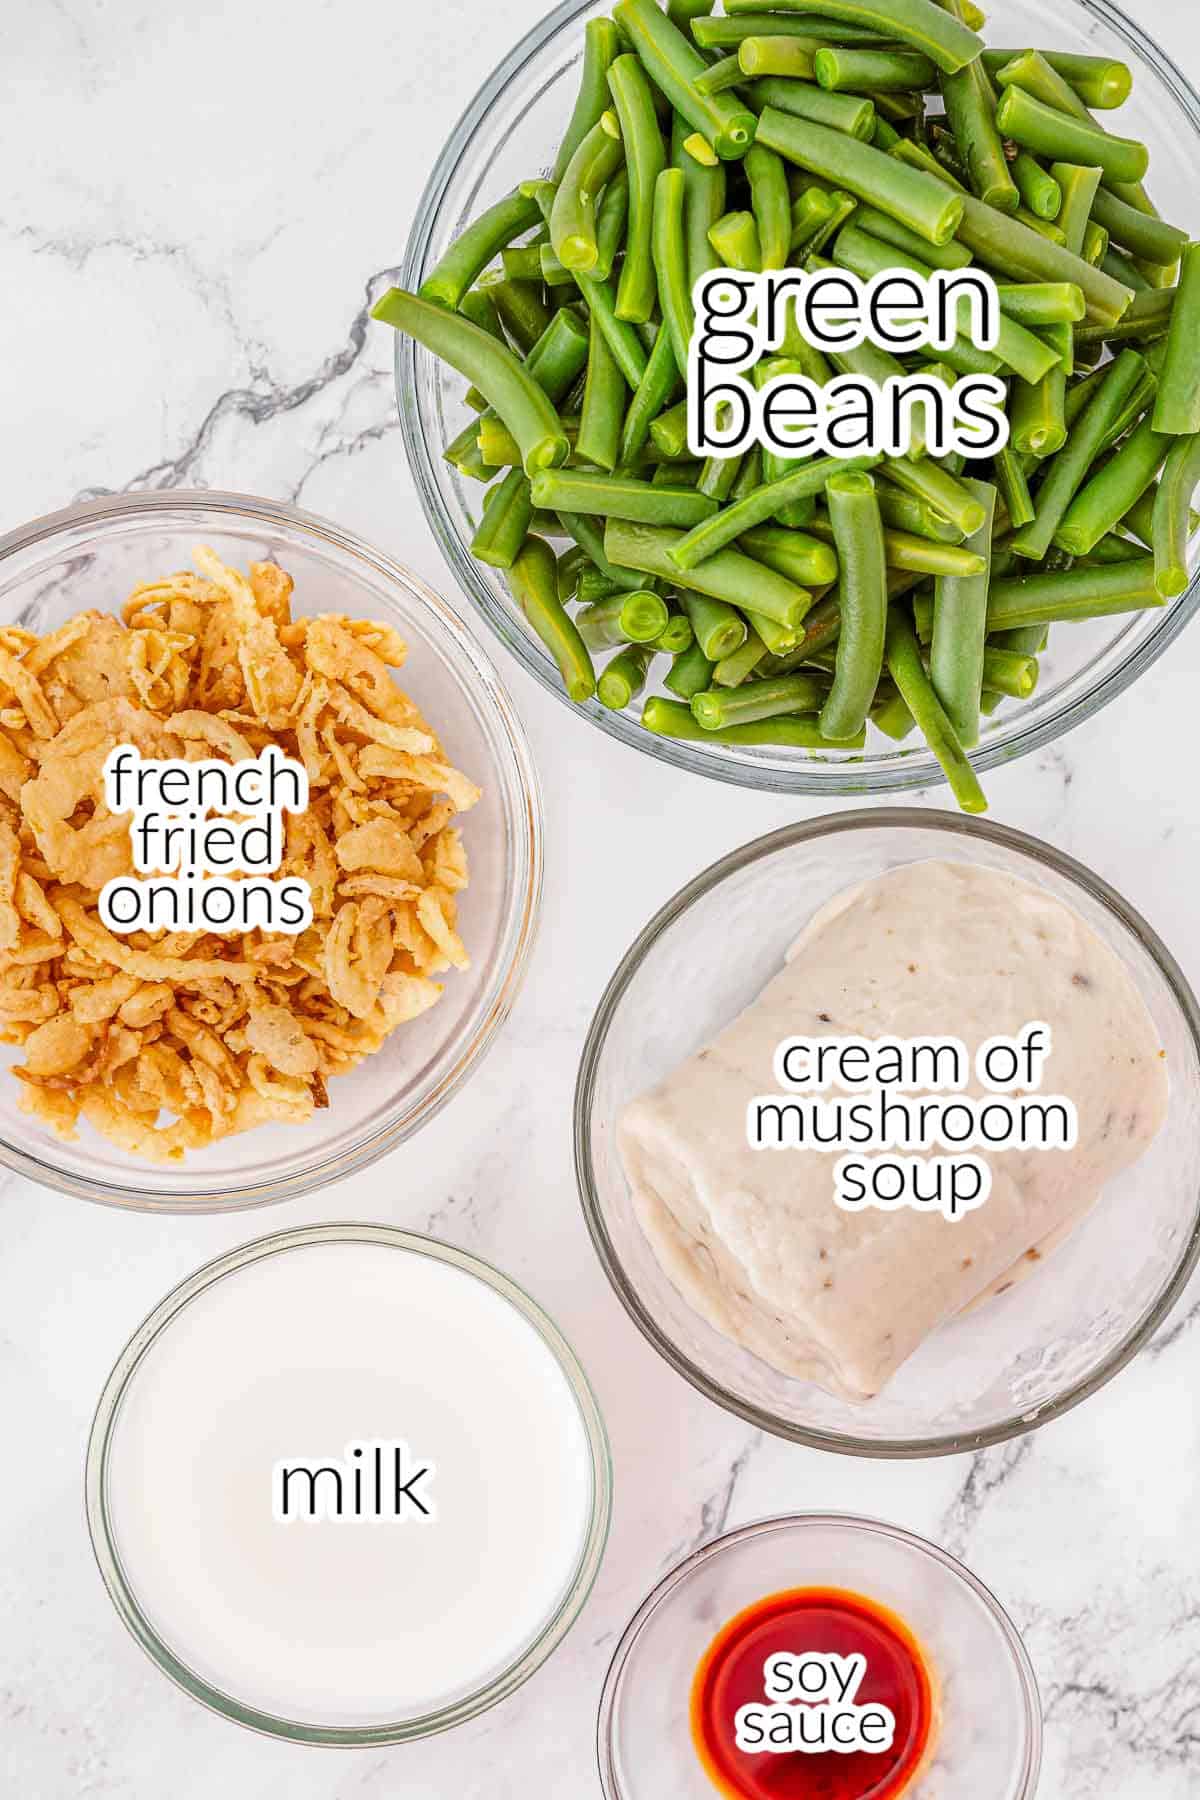 The ingredients for a green bean casserole - green beans, fried onions, cream of mushroom soup, milk and soy sauce.